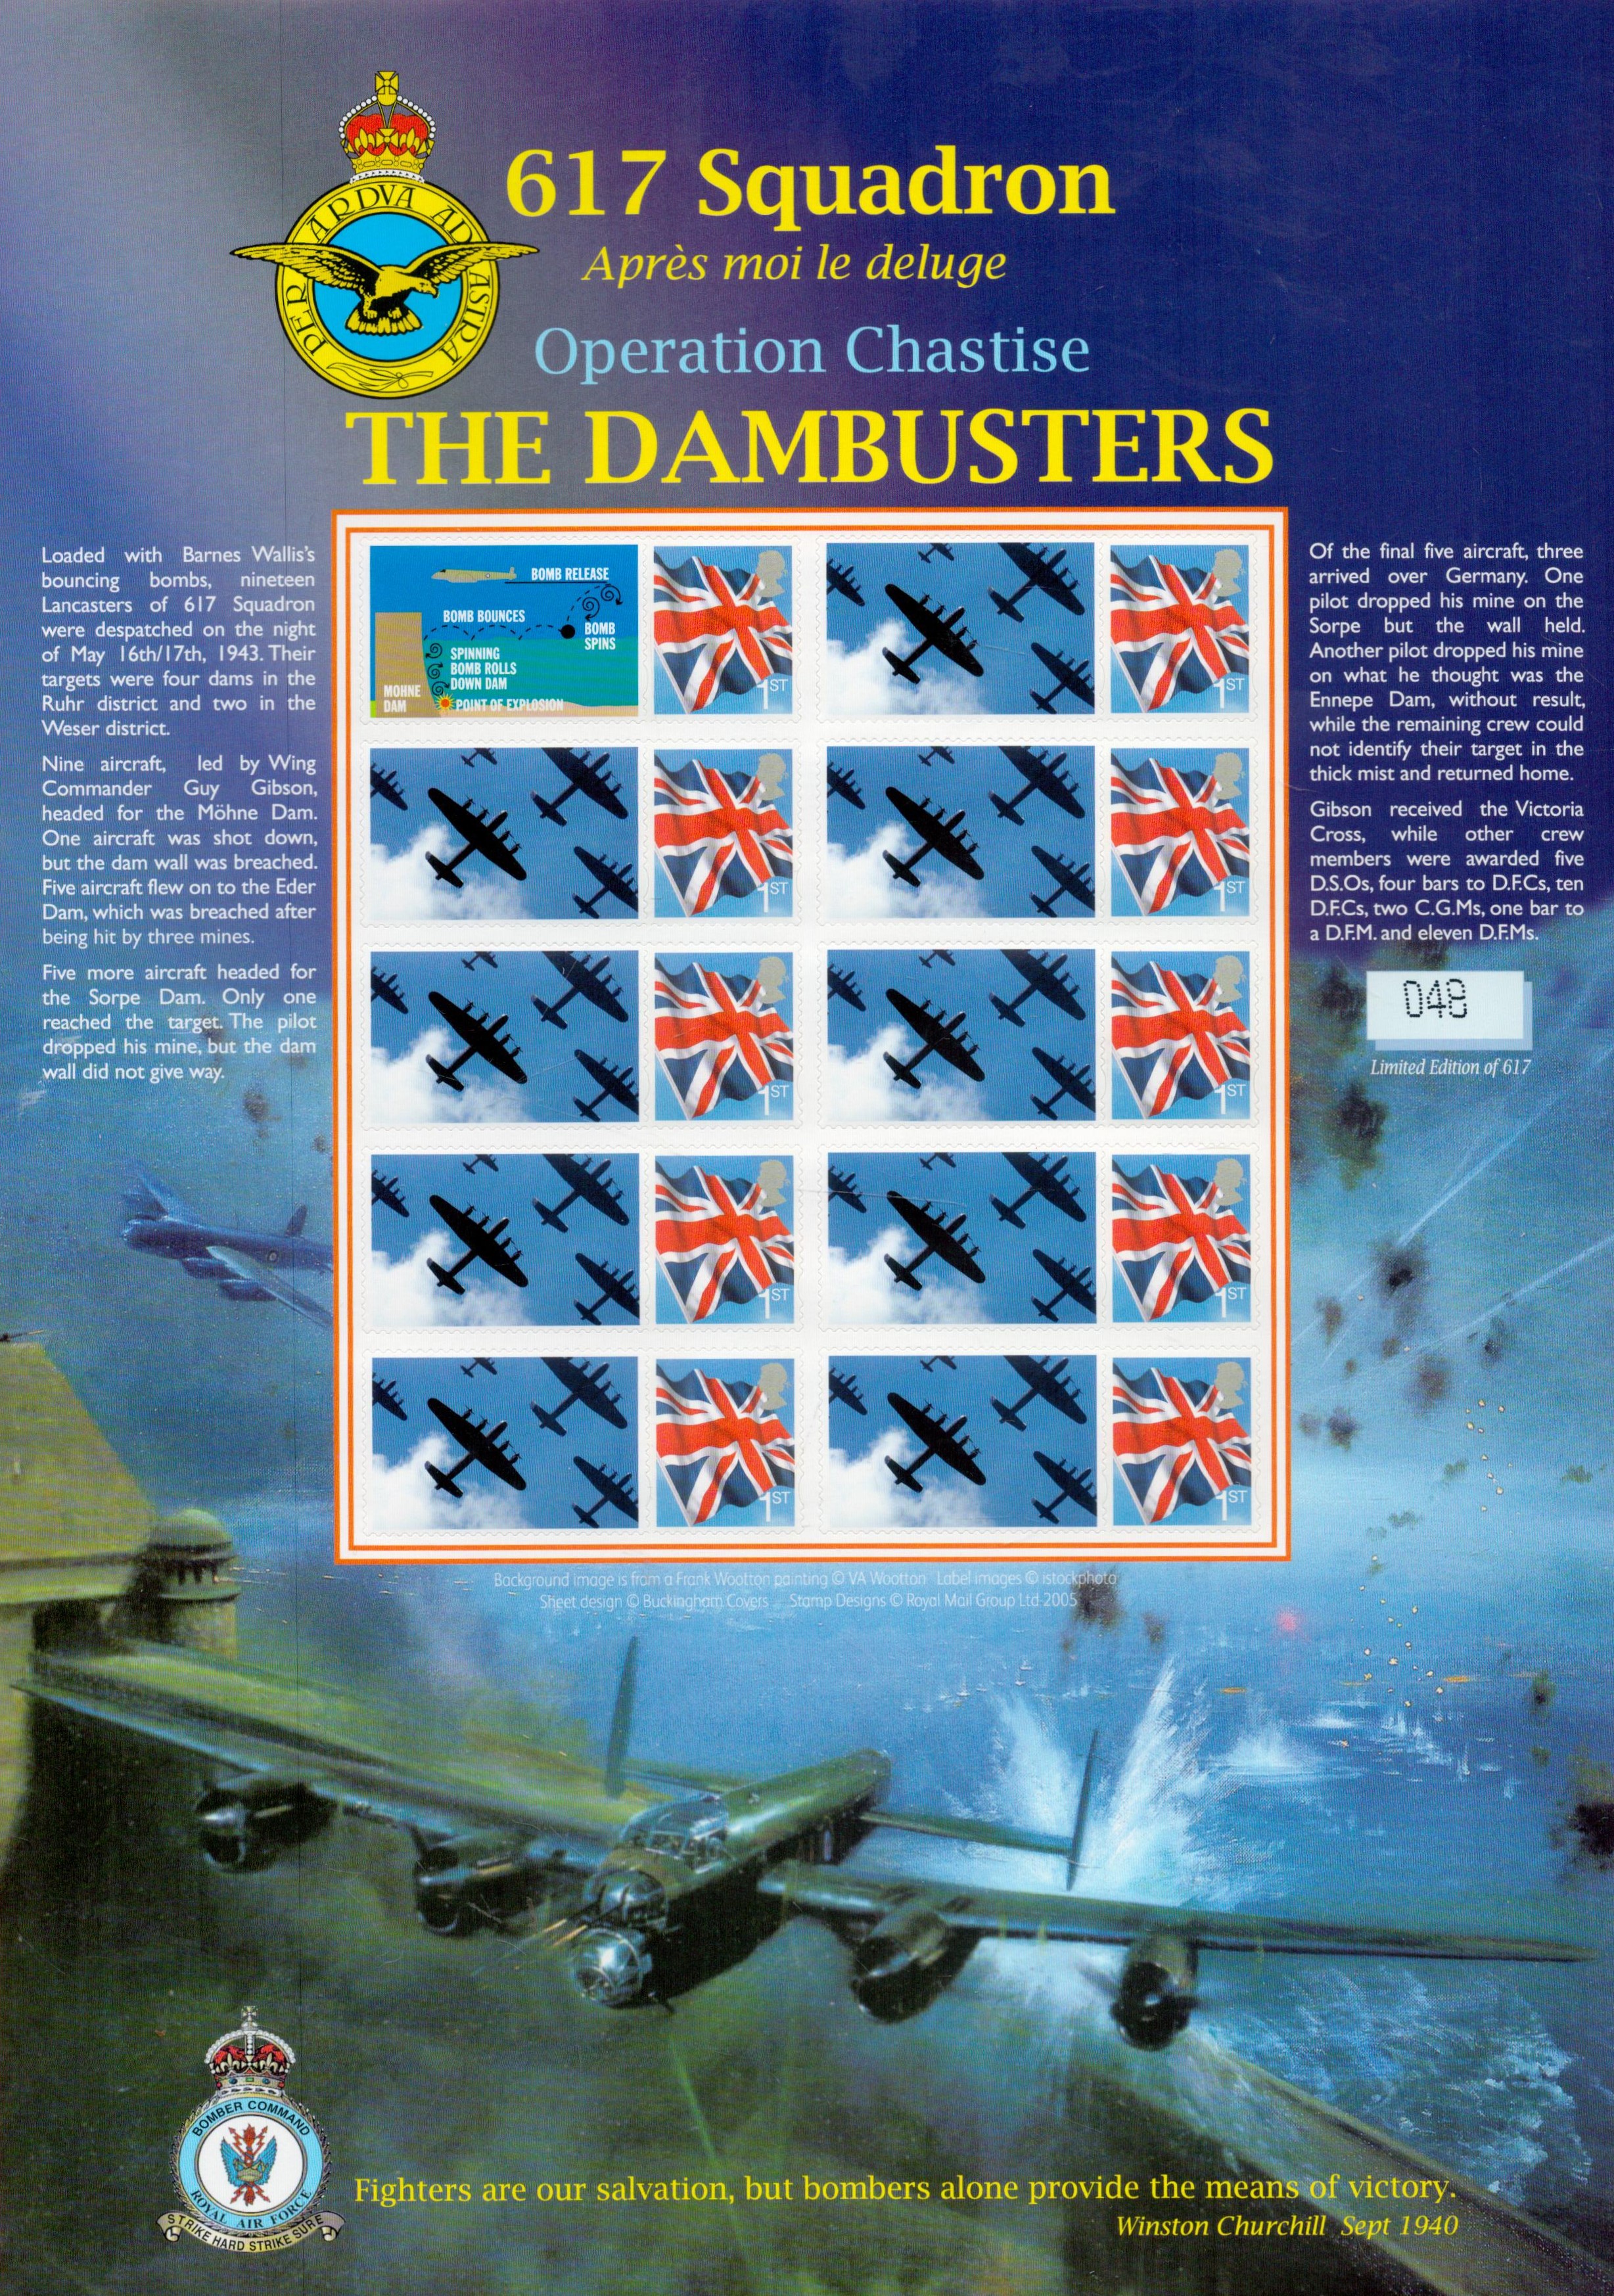 WW2 Dambusters and Battle of Britain Collection of Mint Stamp Sheets. 5 Sheets of 10 Stamps. All - Image 3 of 3